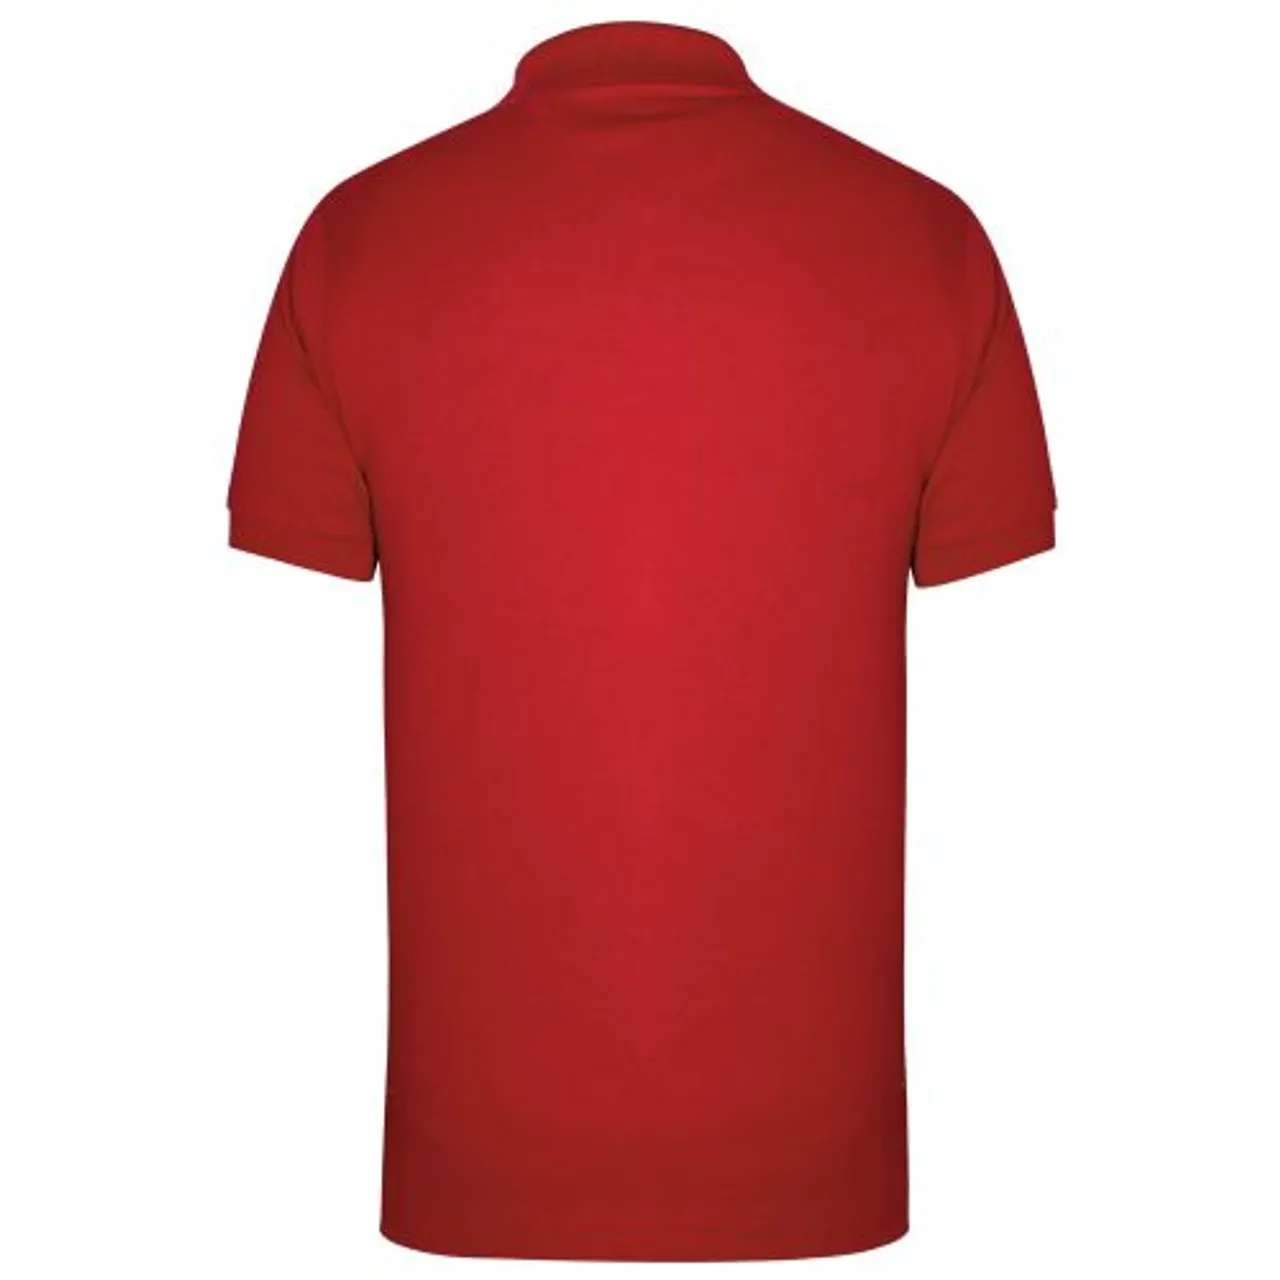 Lacoste Mens Red L1212 Polo Shirt